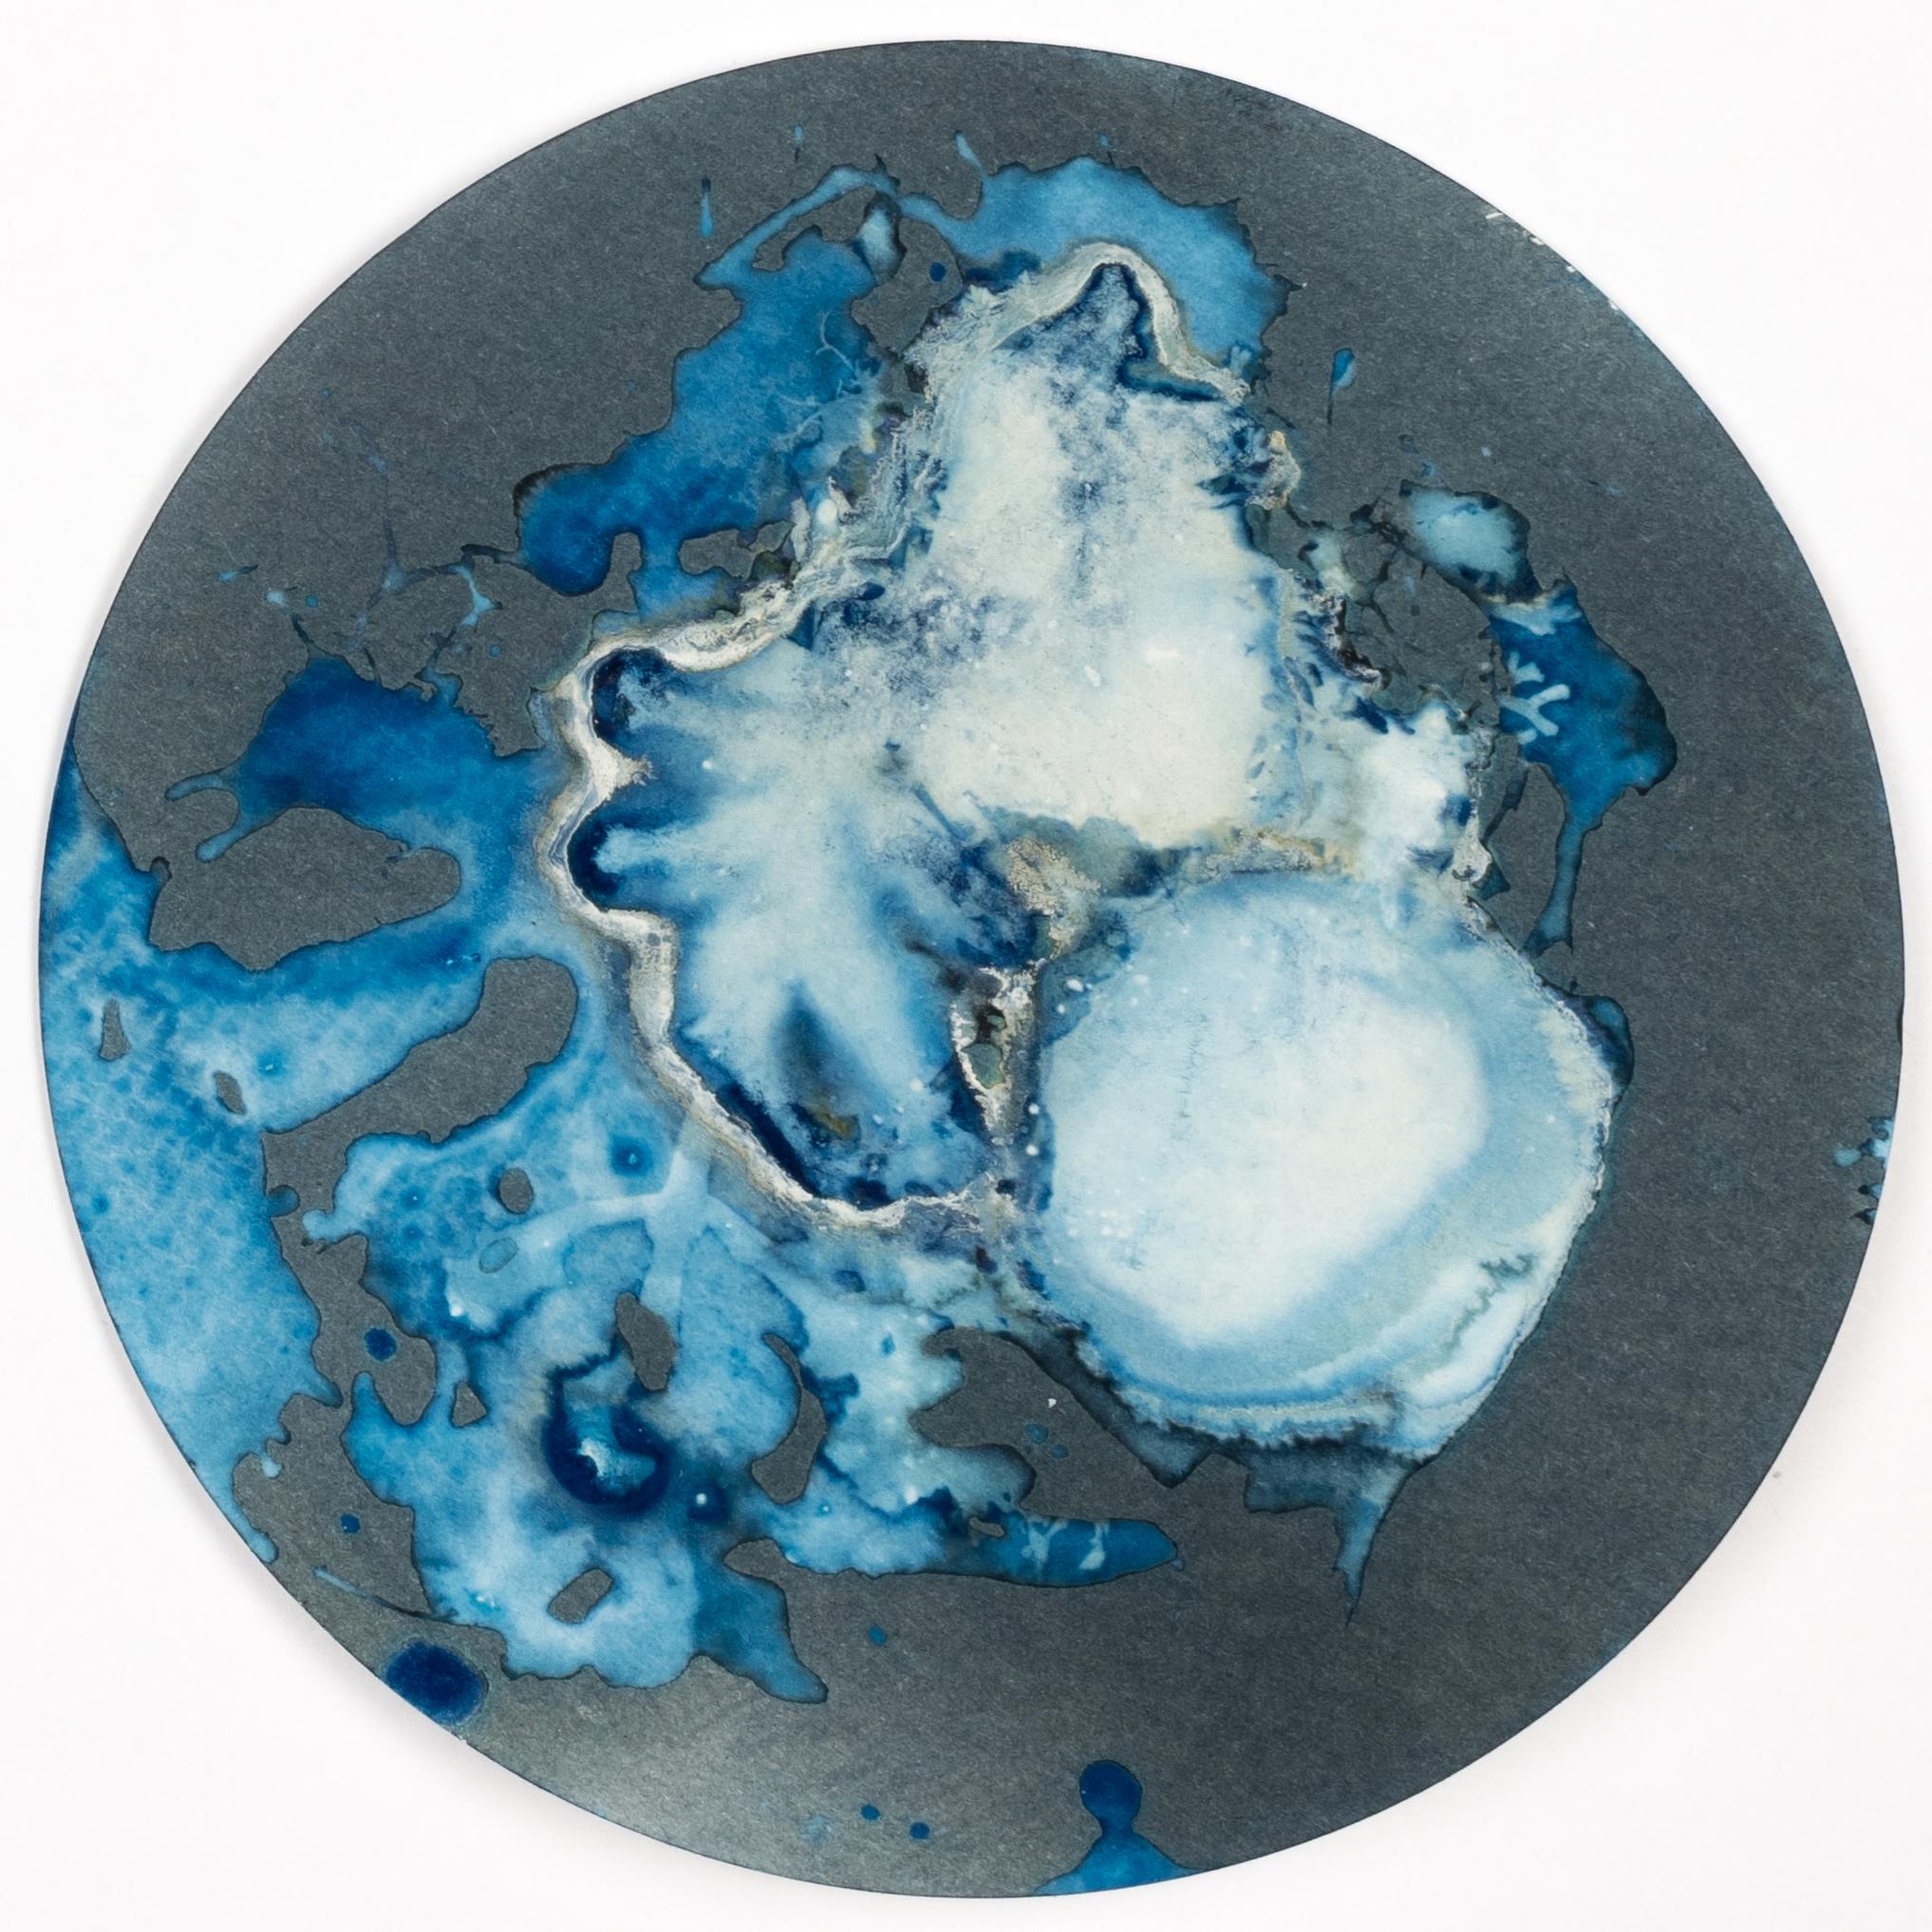 Algas 75, 83 Y 26, 2022 by Paola Davila 
From the series Mareas
Cyanotype on 300 gr cotton paper
Mounted in a high-resistance borosilicate glass petri dish
Overall size: 36 cm Dm x 12 cm H x 2.4 cm Deep.
Individual Image size: 10.5 cm D. 
Each Petri